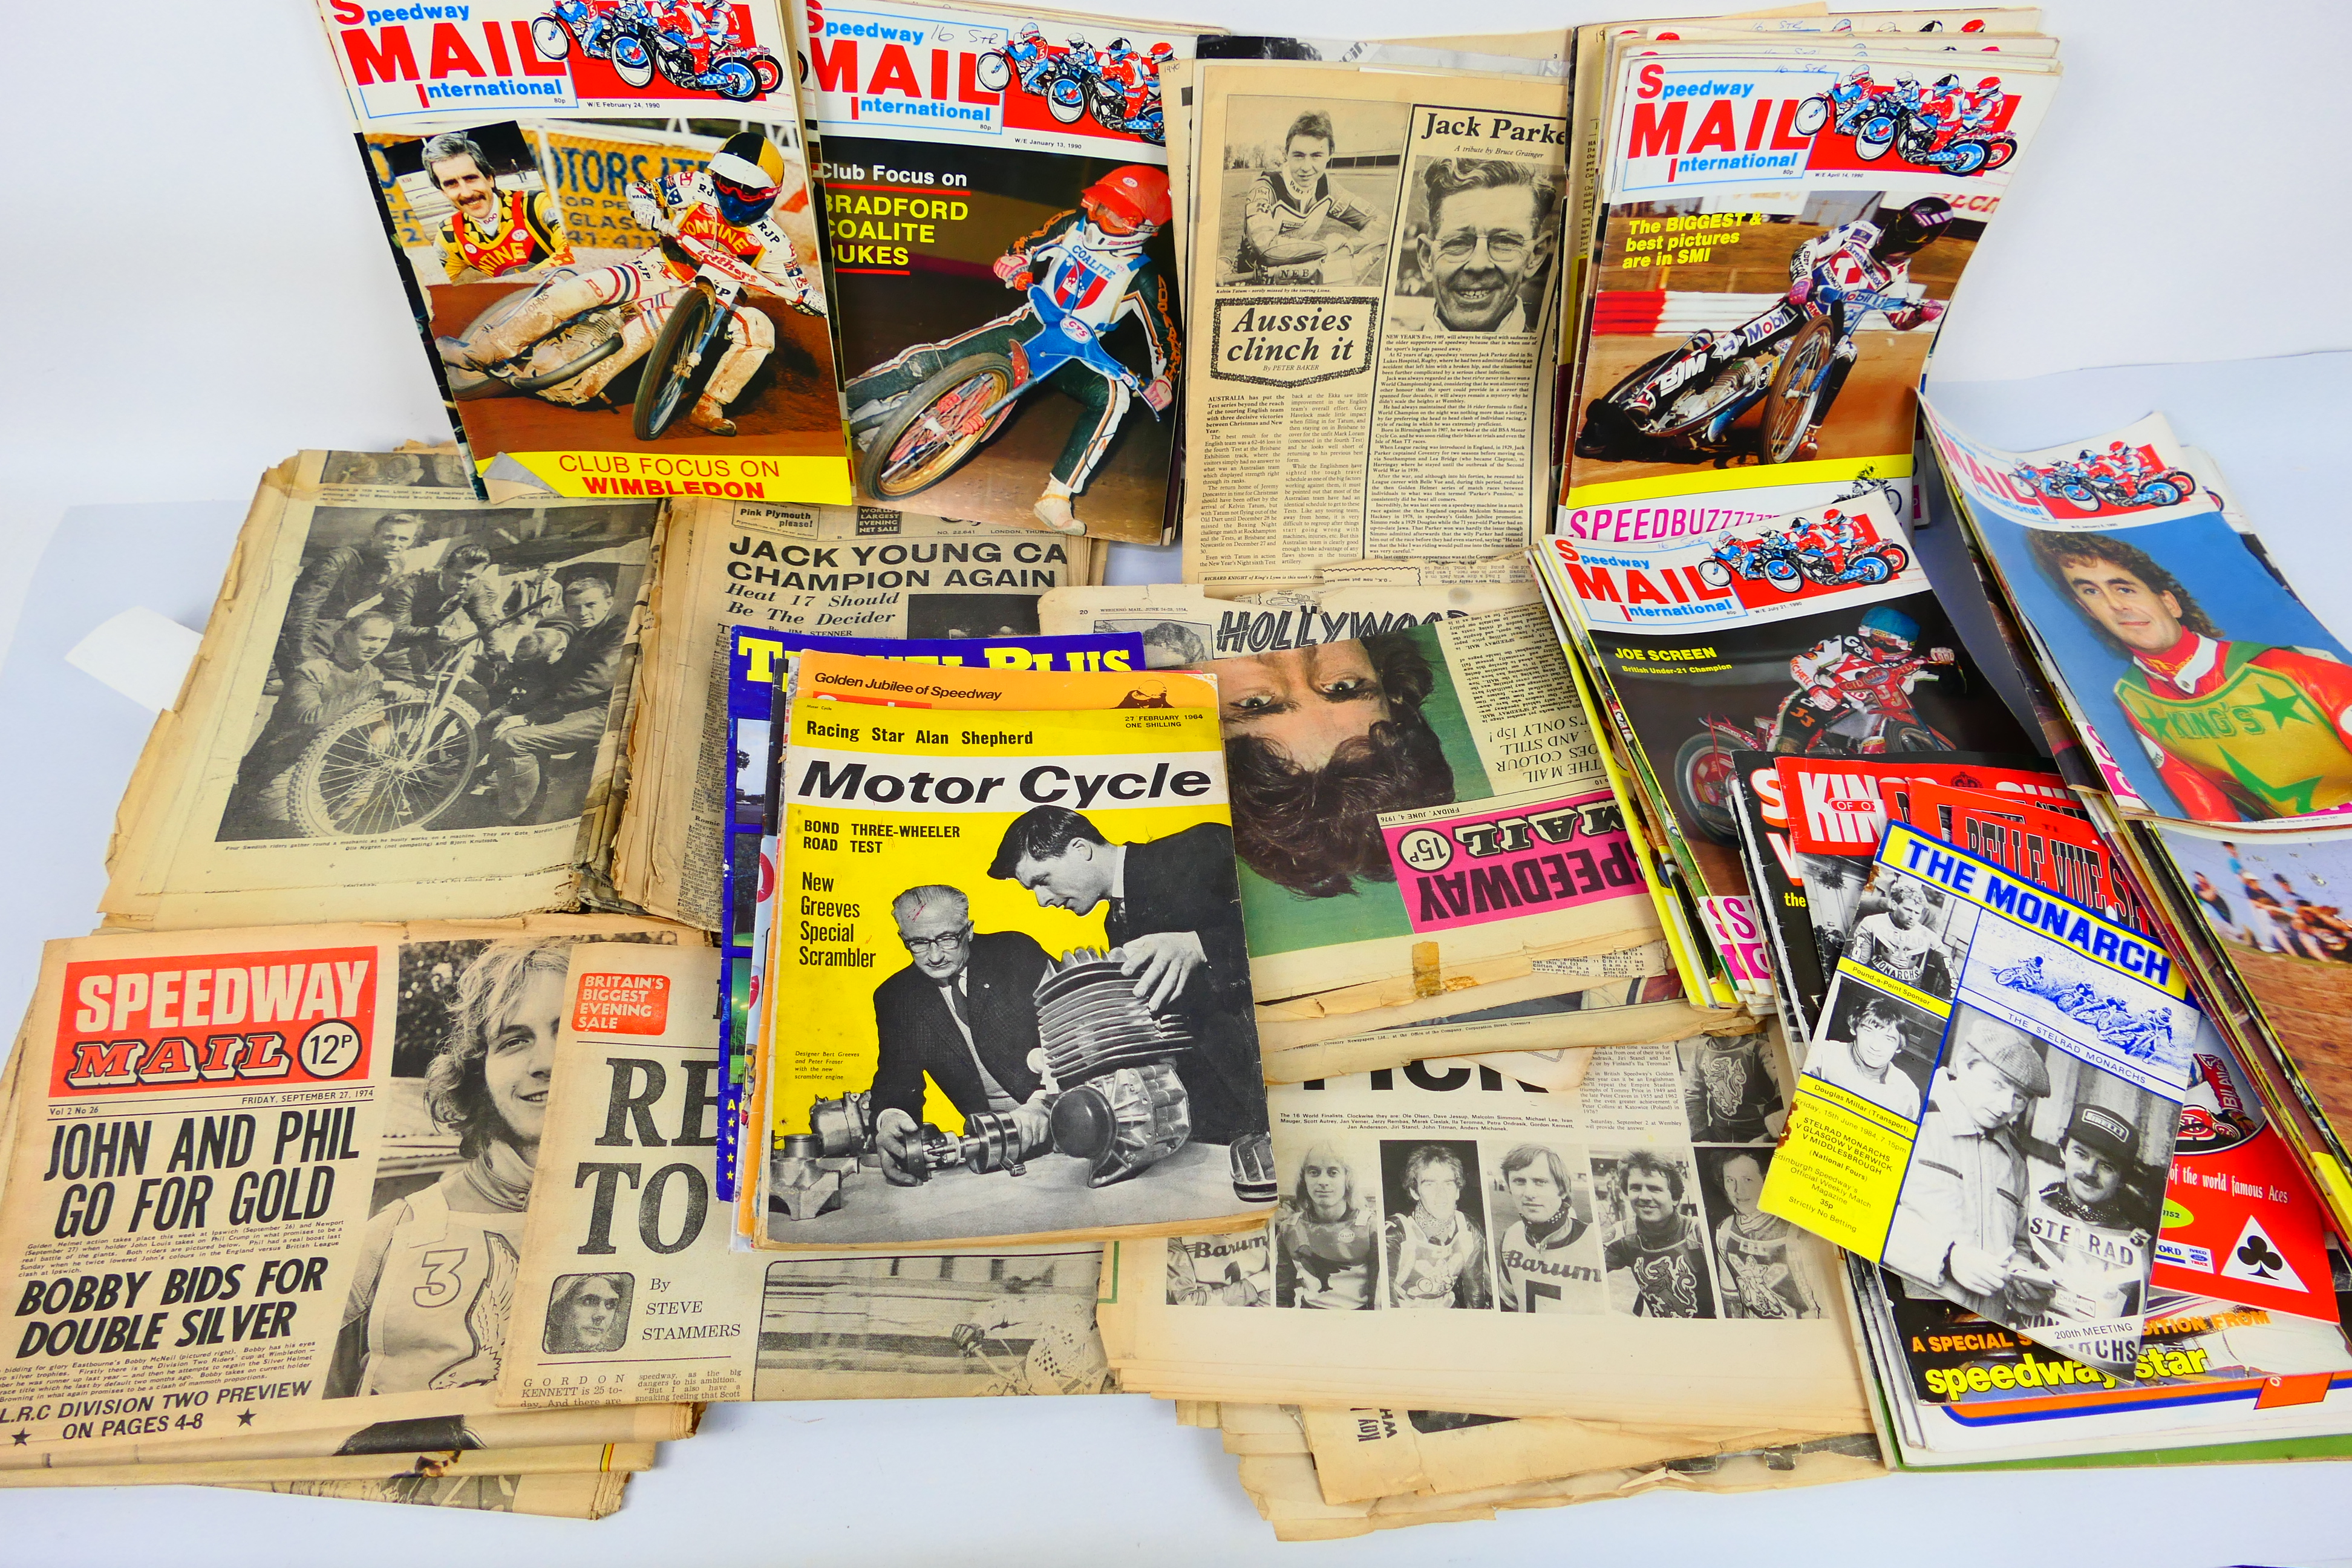 Speedway Interest - A collection of vintage speedway related magazines and ephemera,